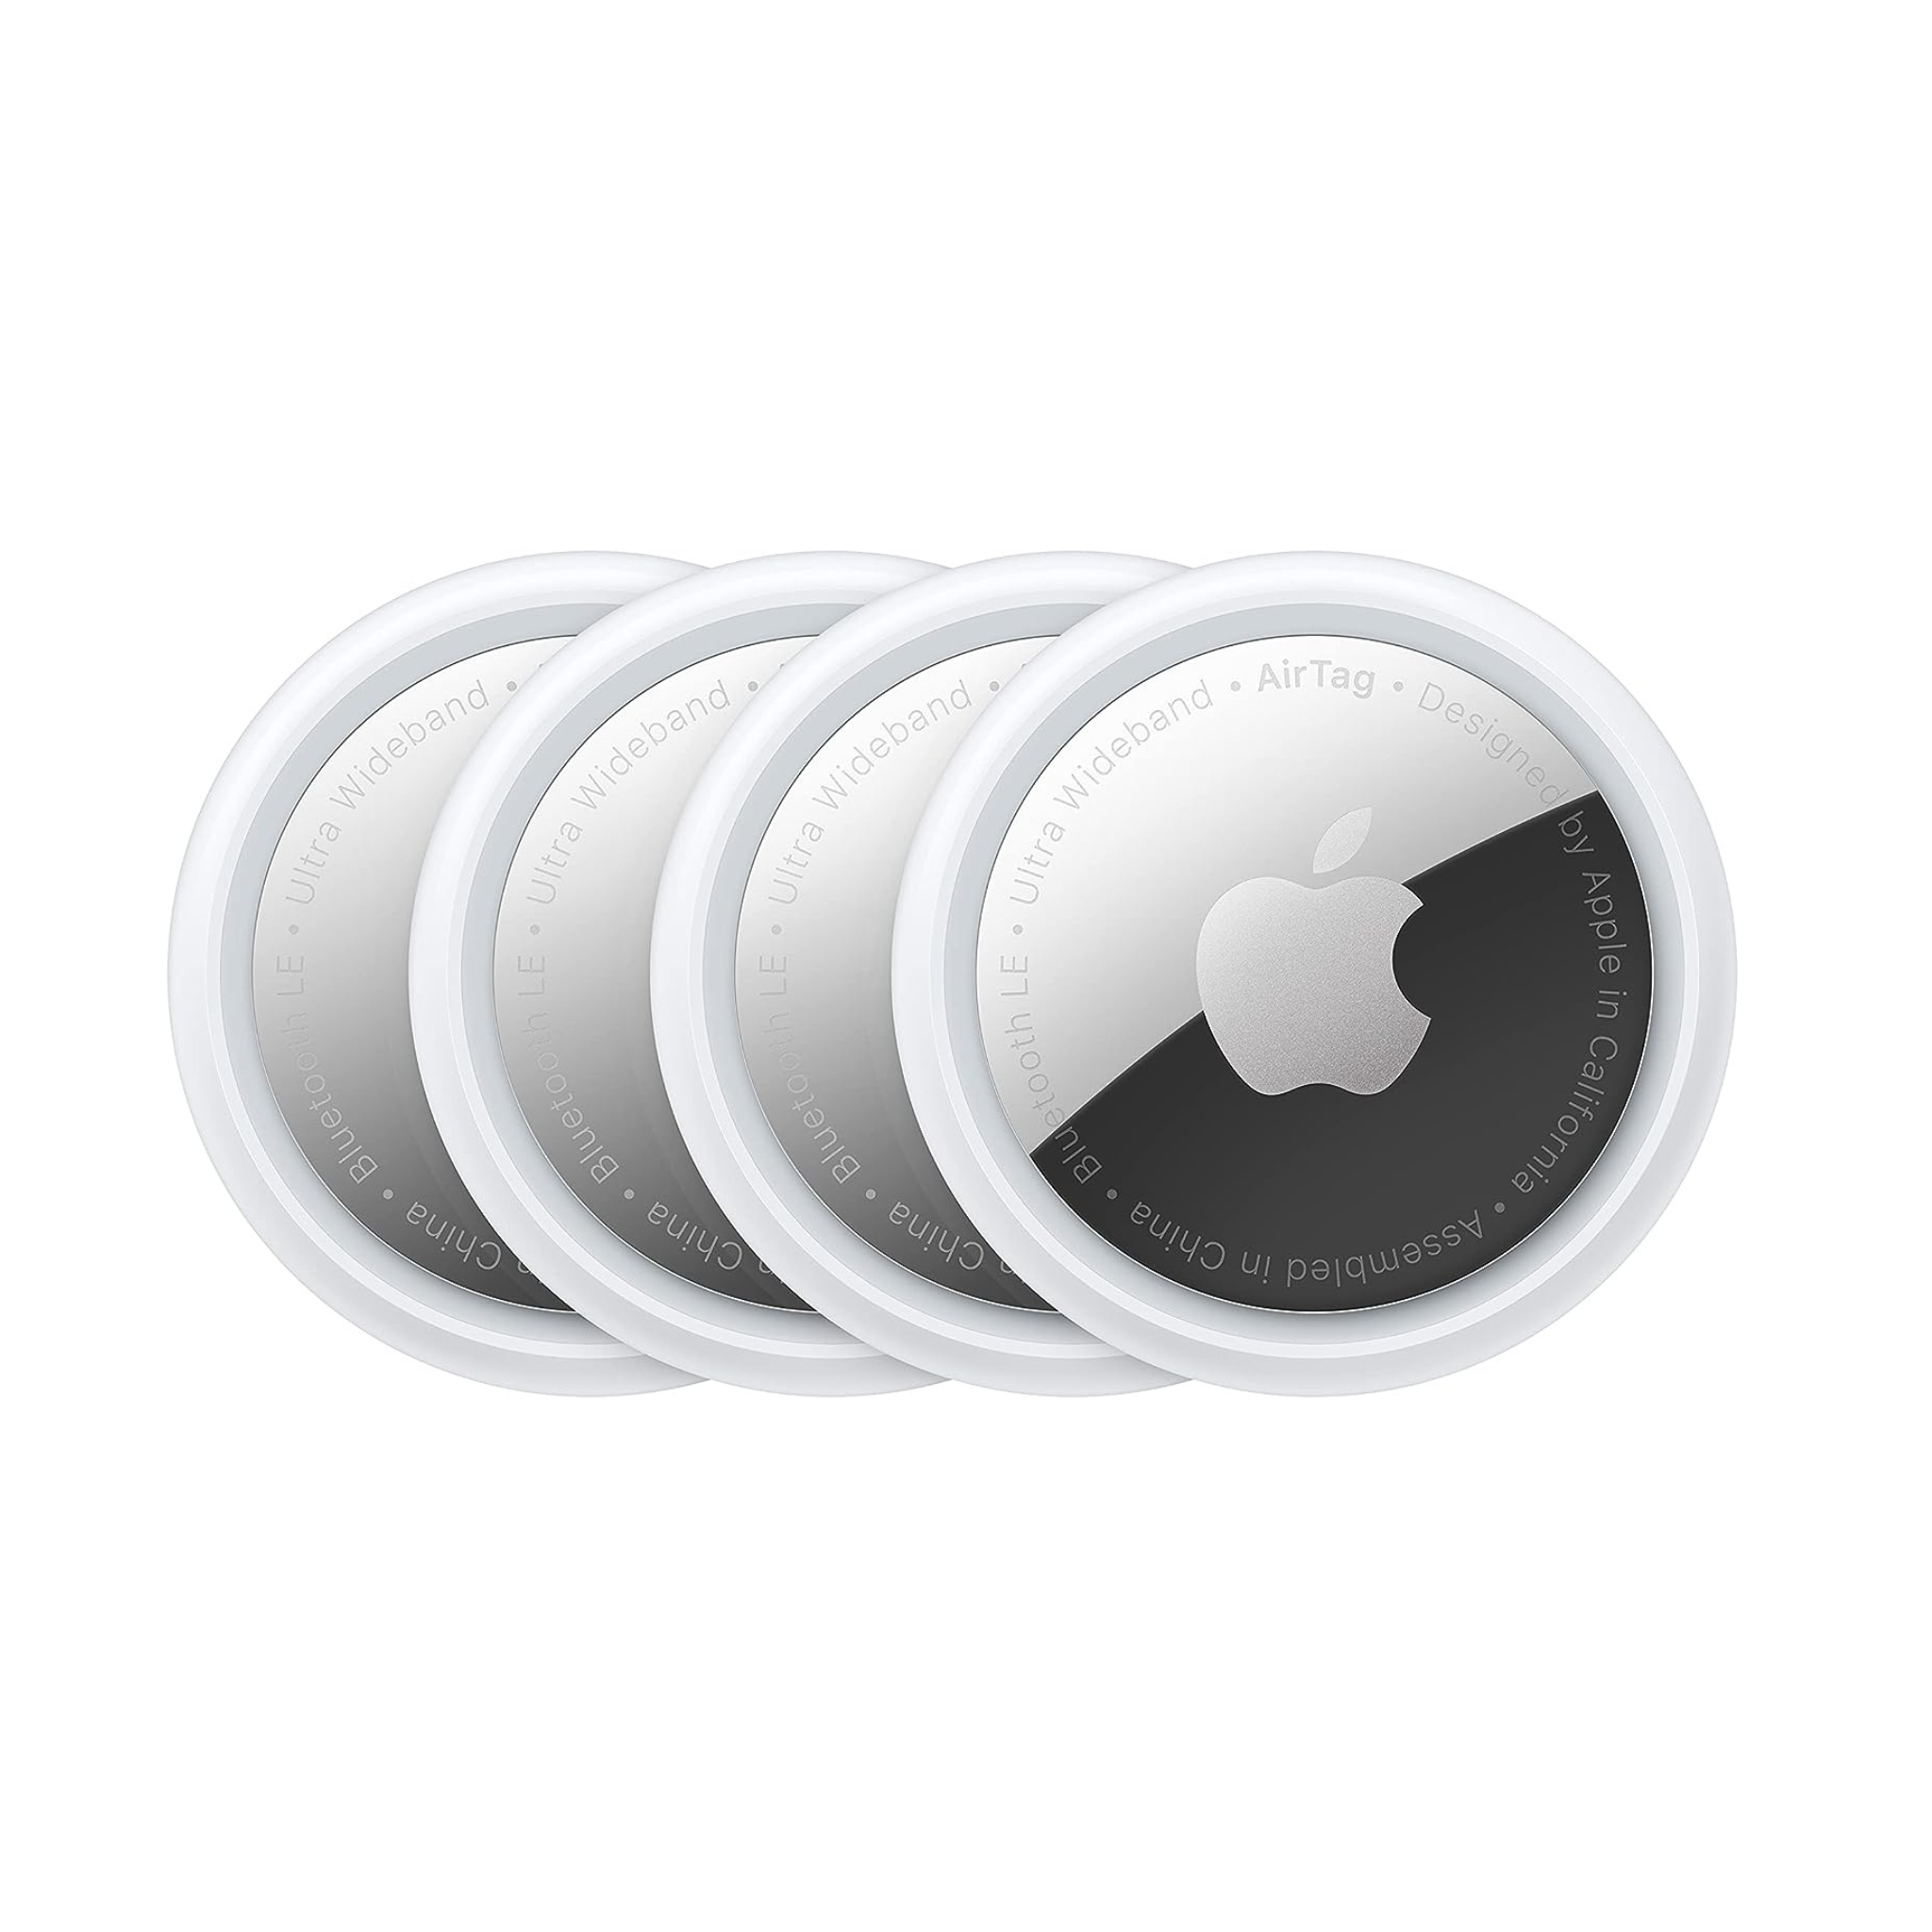 4-Pack Apple AirTags Sleek Tracker Devices